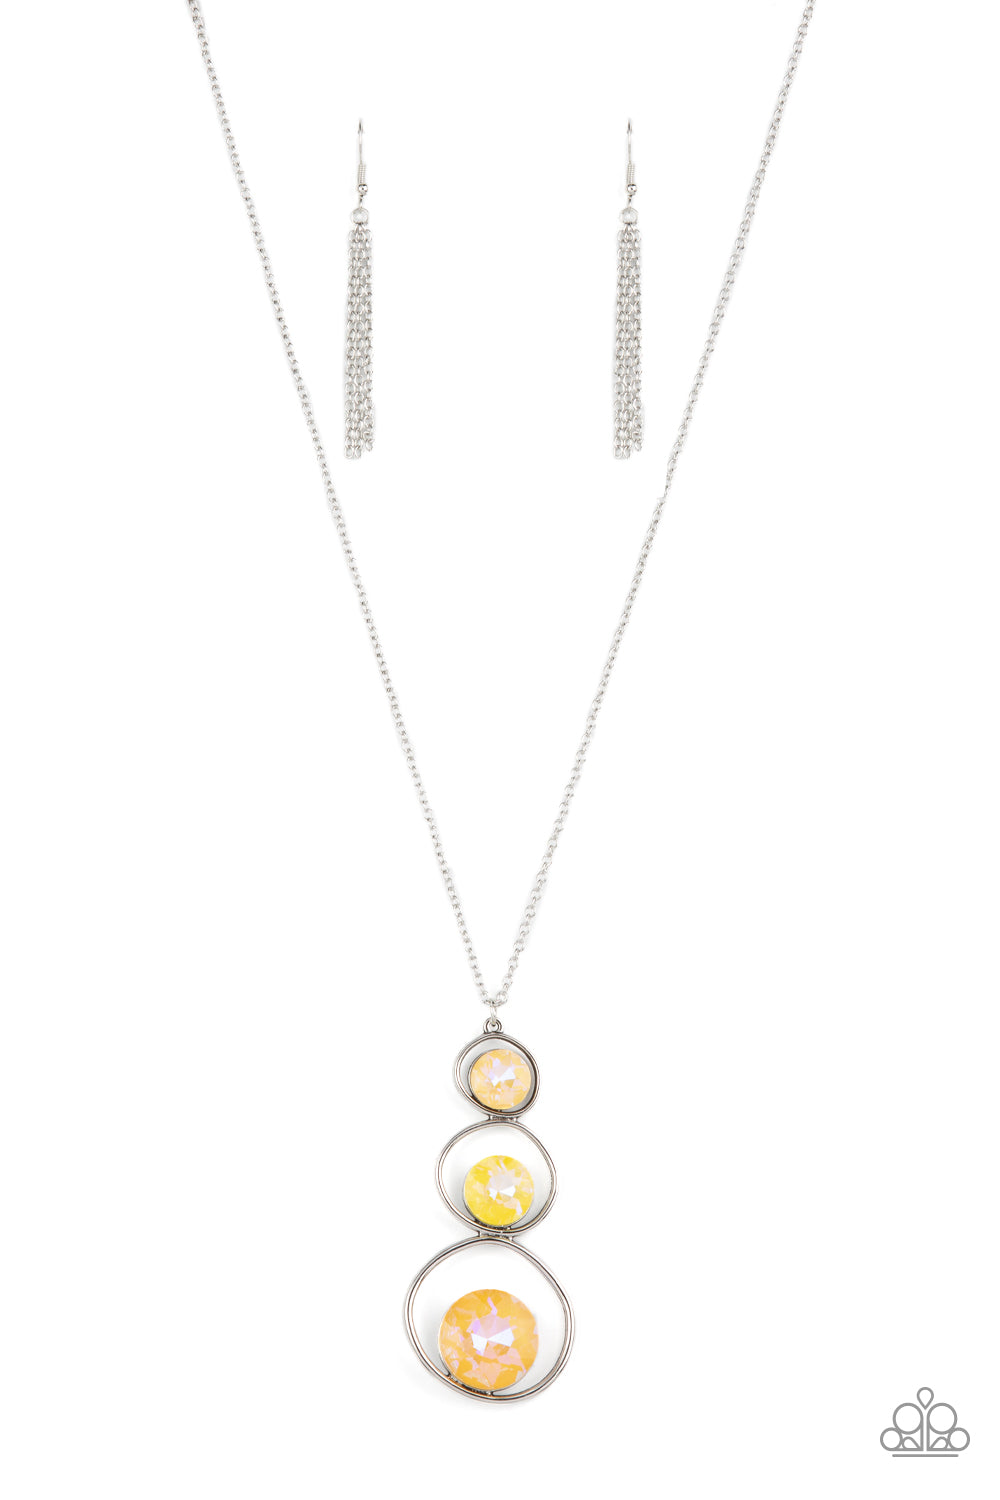 Paparazzi - Celestial Courtier - Yellow Necklace